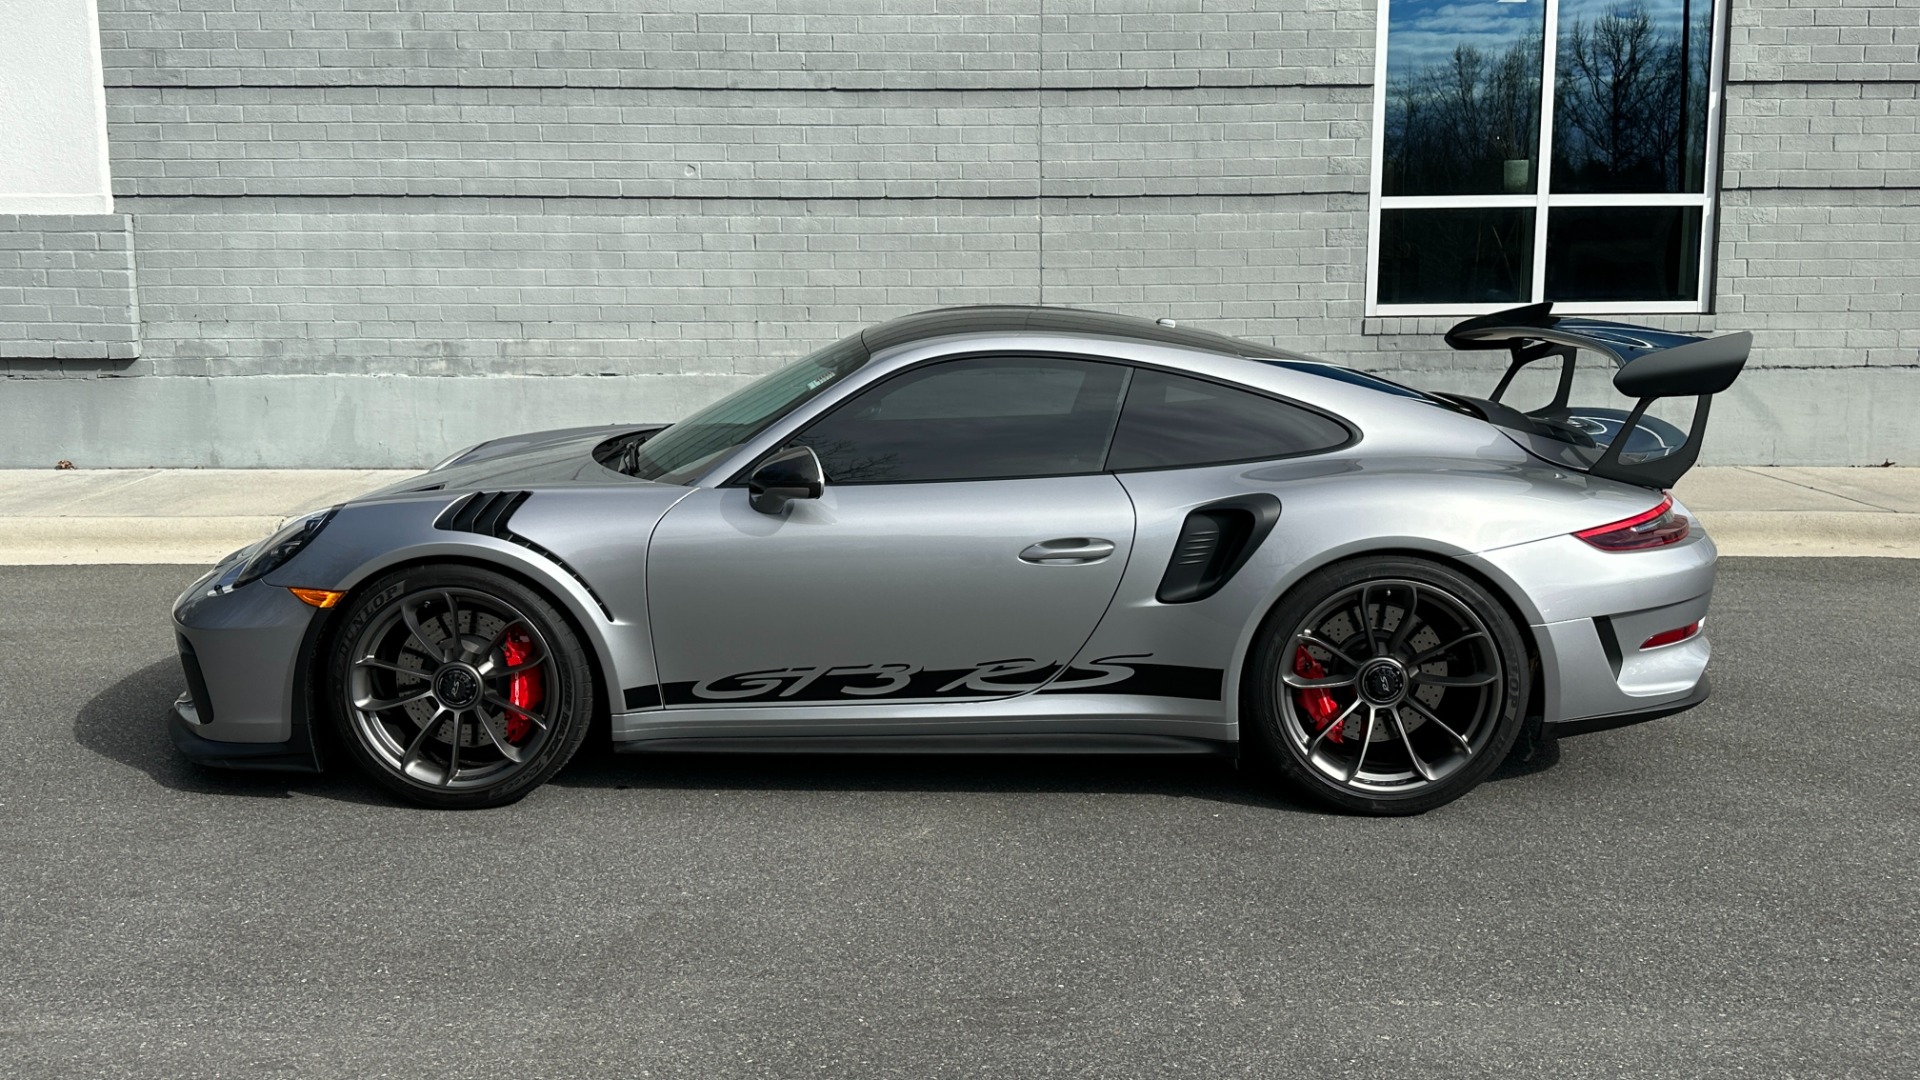 Used 2019 Porsche 911 GT3 RS WEISSACH / FULL XPEL PPF / DUNDON HEADERS / EXHAUST / FRONT LIFT for sale $248,999 at Formula Imports in Charlotte NC 28227 7